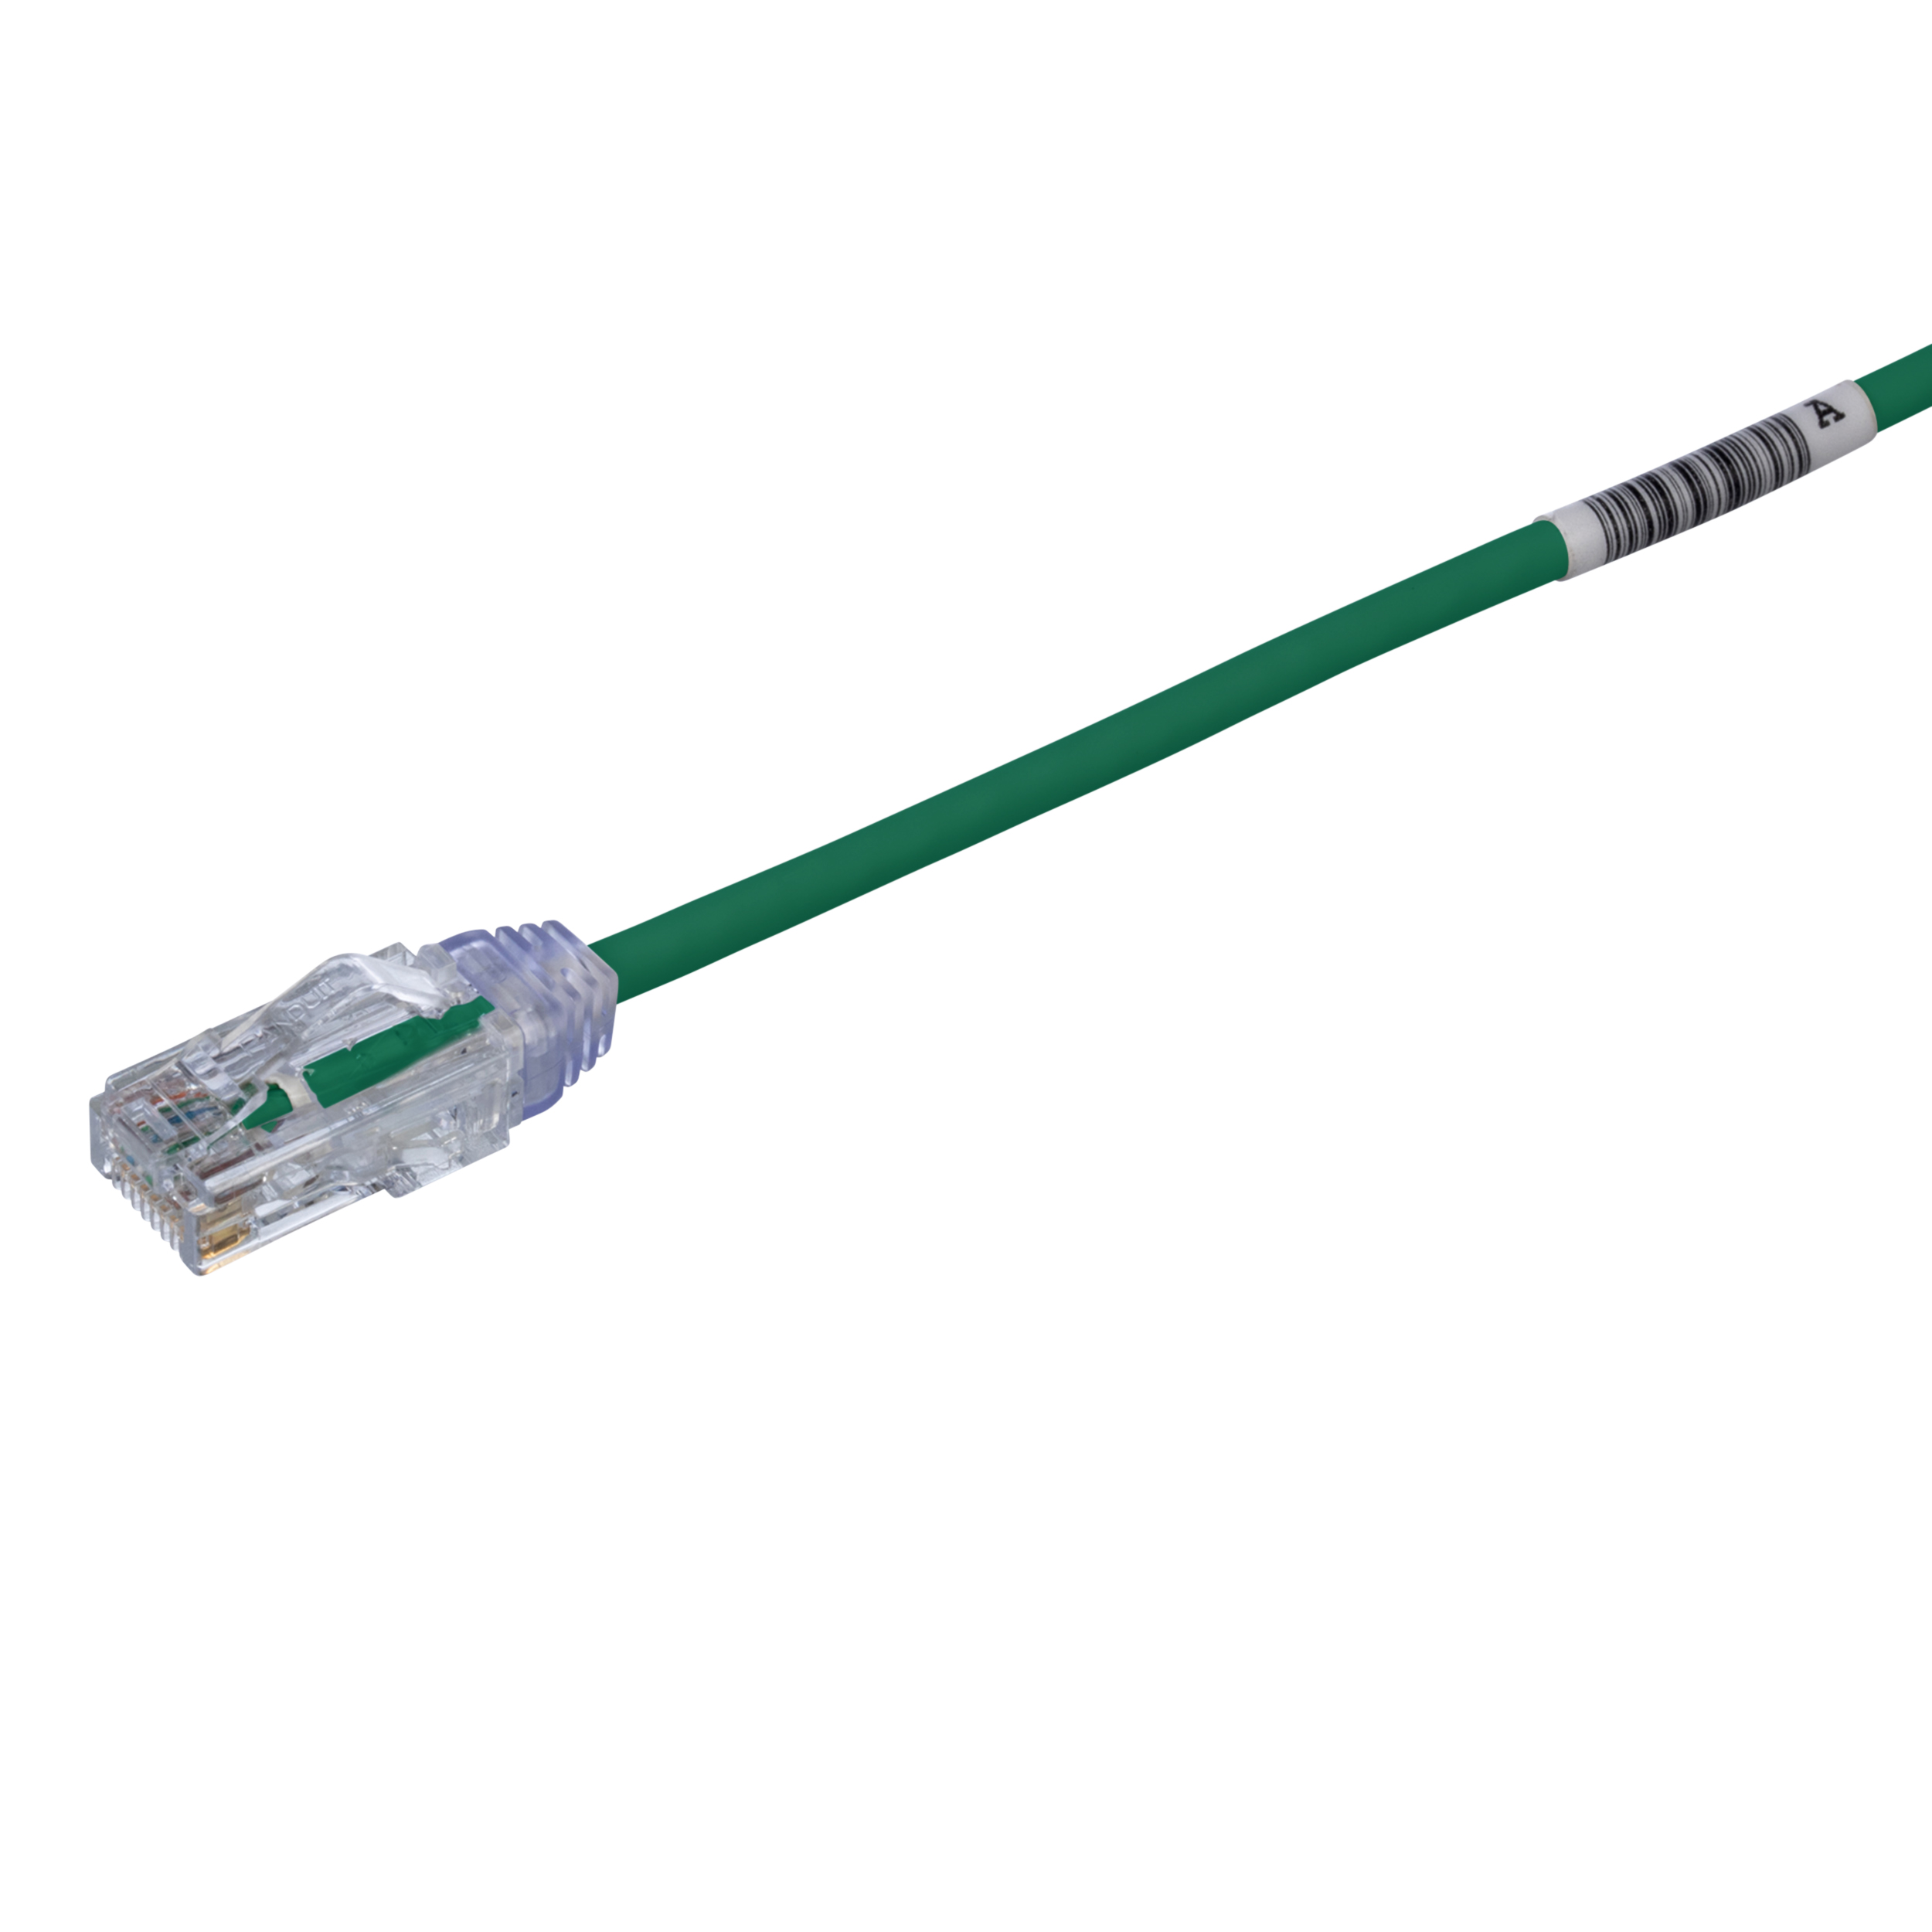 Cat 6 28 AWG UTP Copper Patch Cord, 1 m, Green